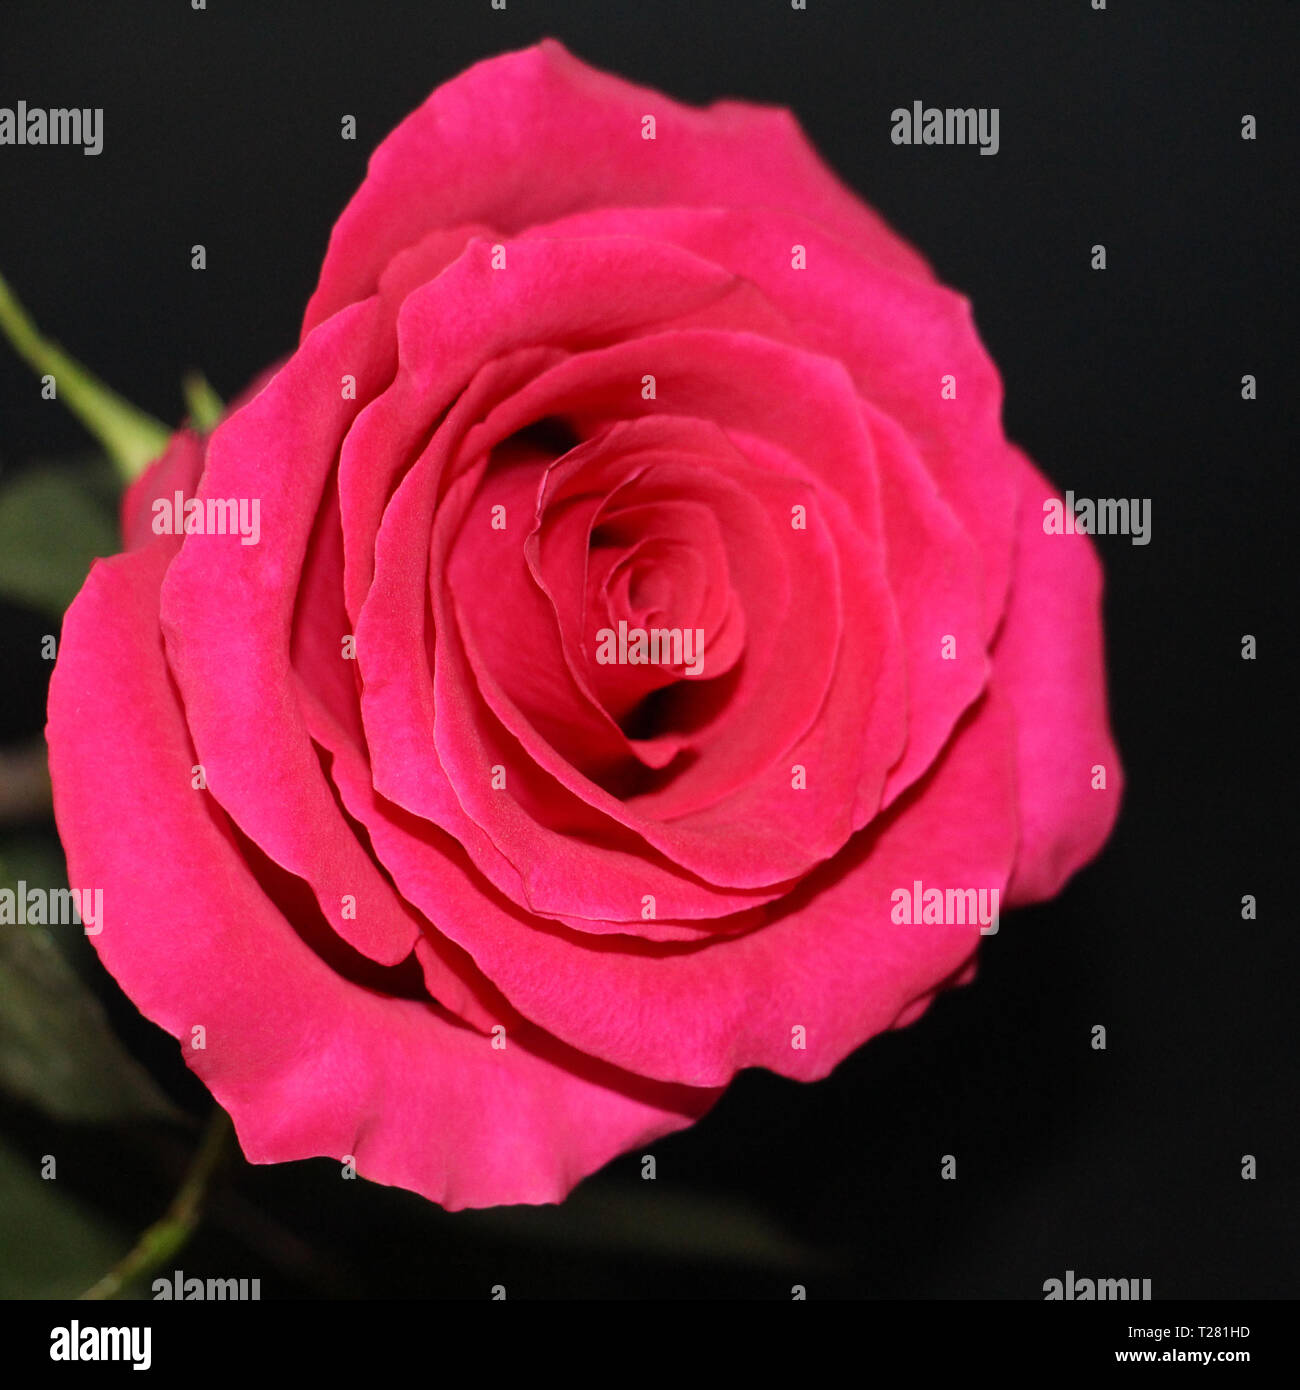 One red rose on a dark background close-up. A beautiful big rose bud has opened. Stock Photo